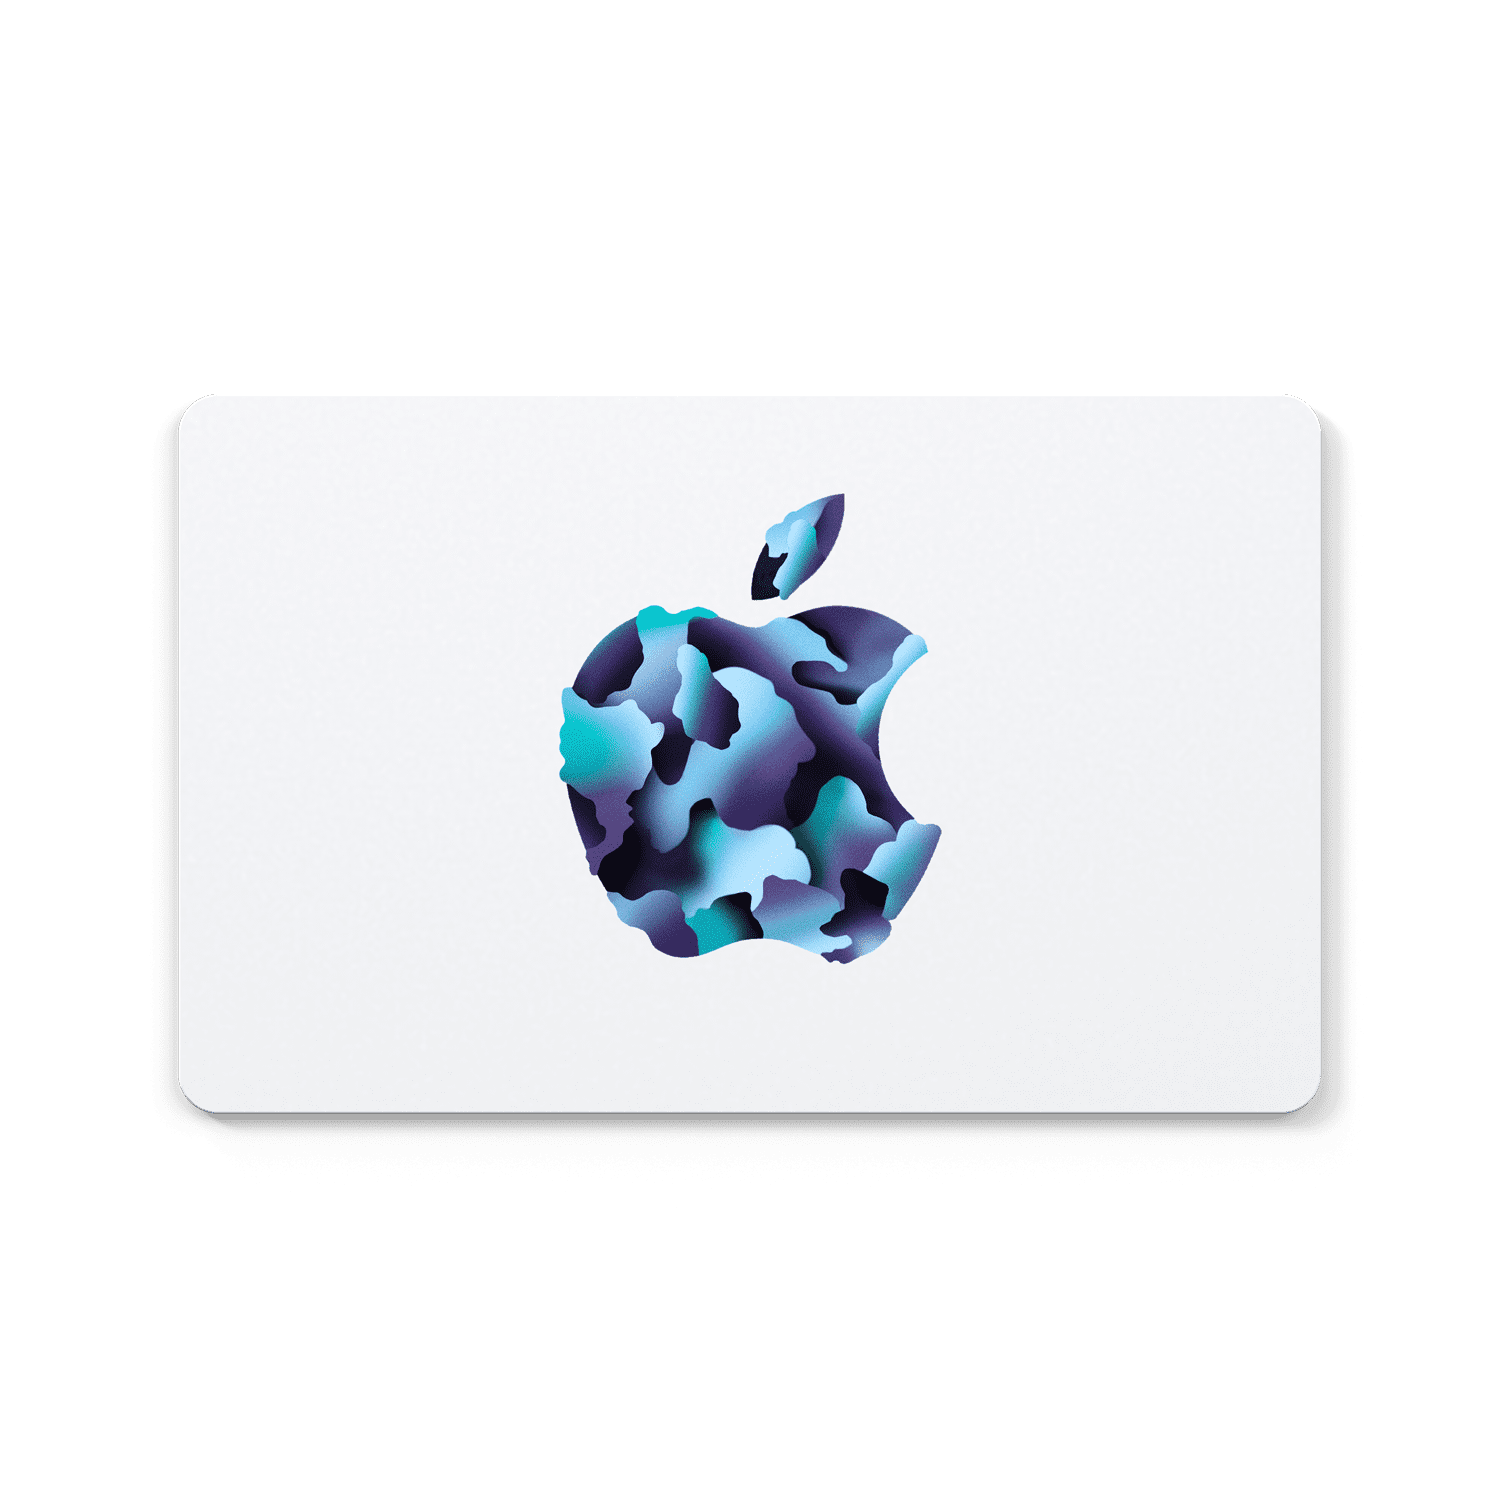 $25 Apple Gift Card (Email Delivery) 